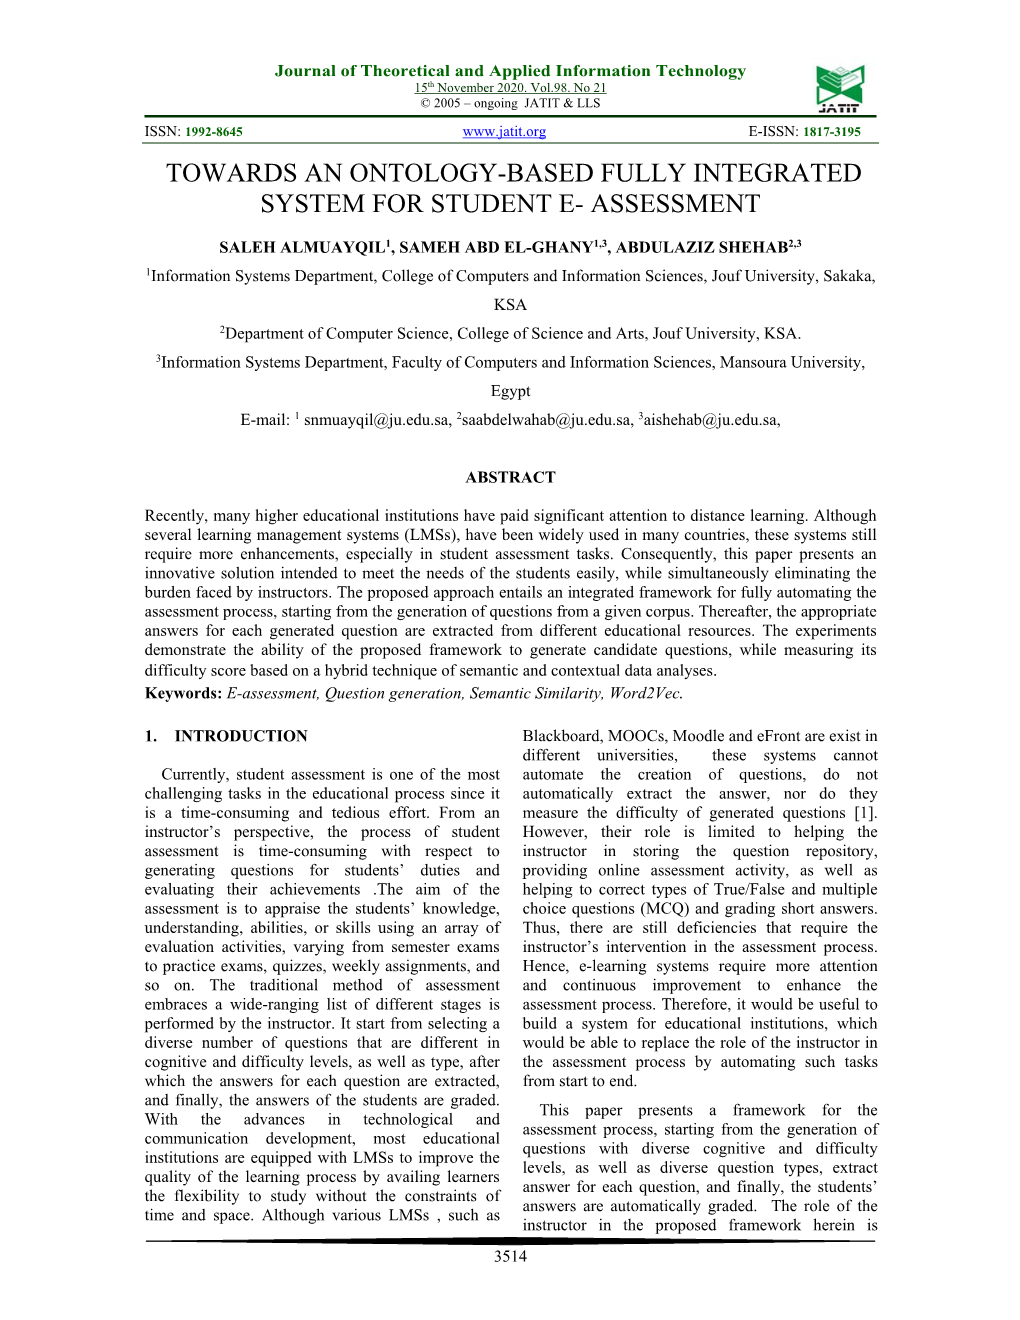 Towards an Ontology-Based Fully Integrated System for Student E- Assessment